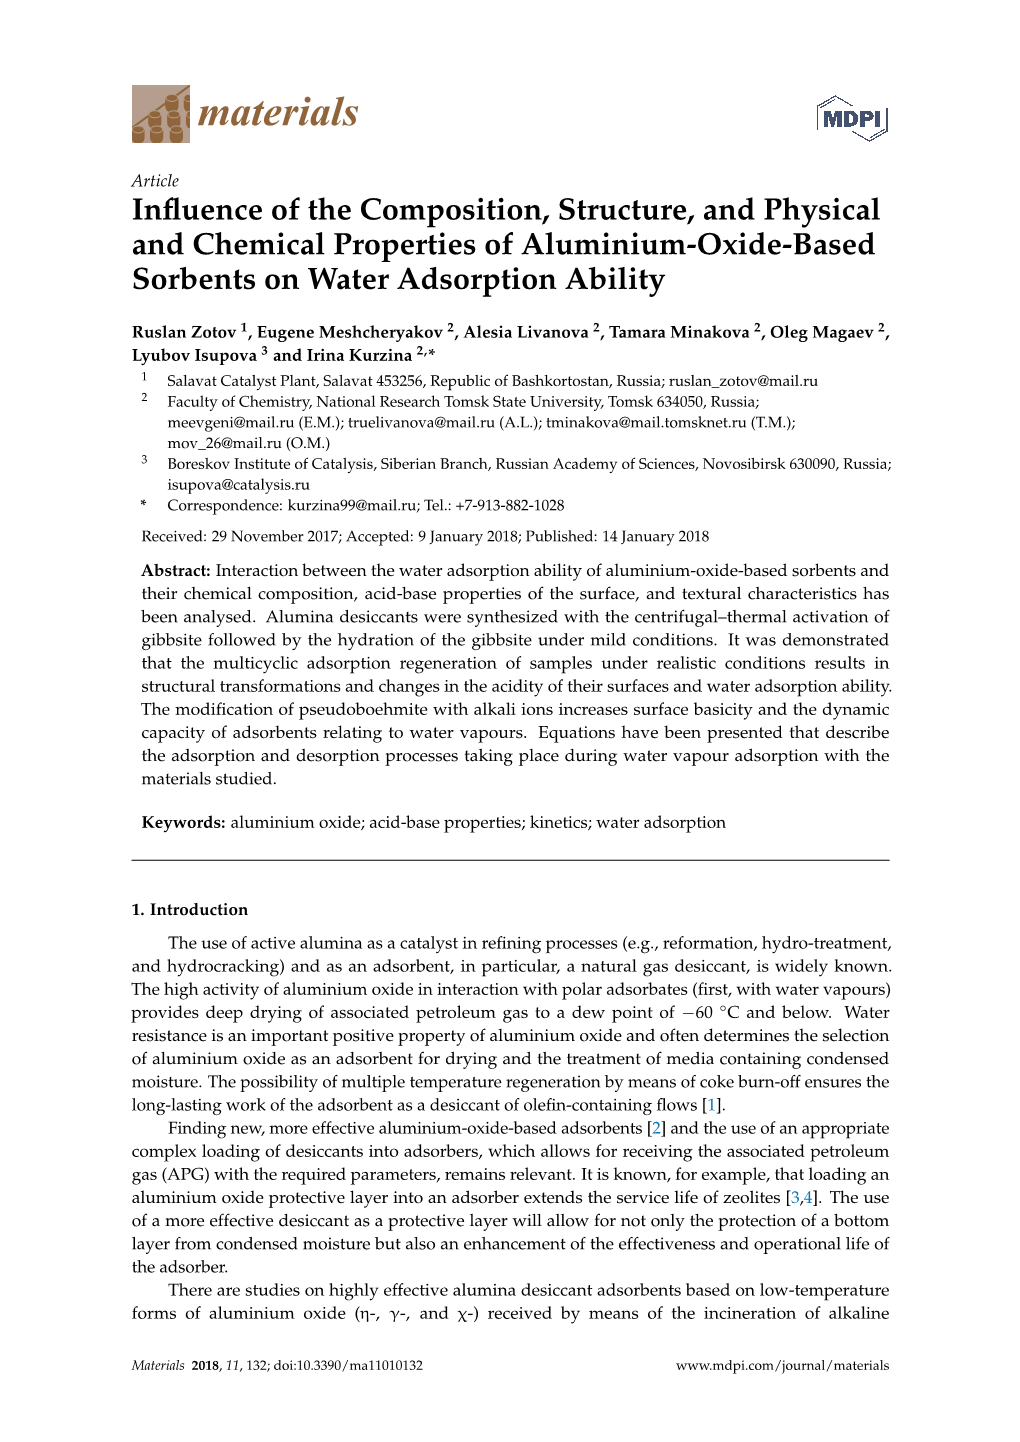 Influence of the Composition, Structure, and Physical and Chemical Properties of Aluminium-Oxide-Based Sorbents on Water Adsorpt